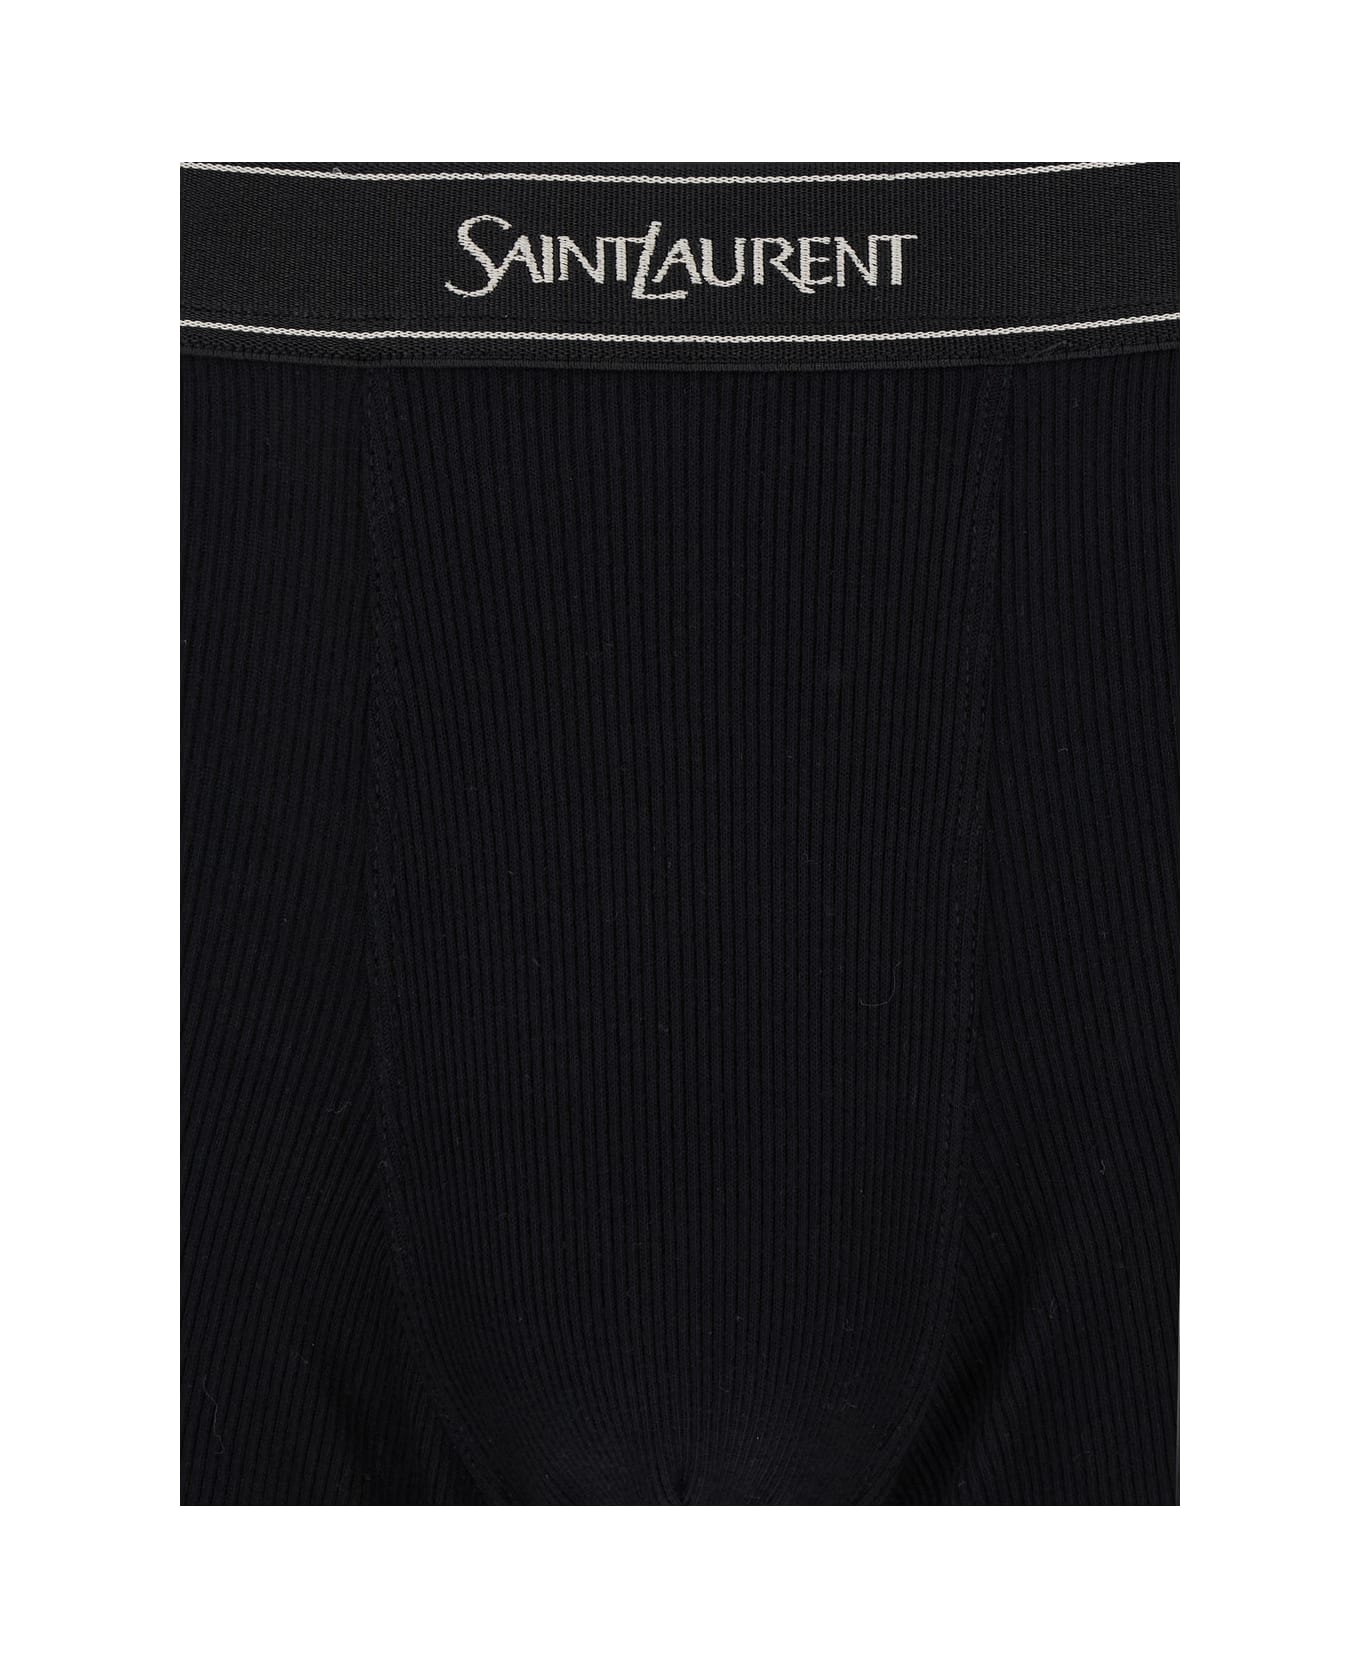 Saint Laurent Black Boxer Briefs With Logo Lettering Embroidery In Ribbed Cotton Man - NOIR ショーツ